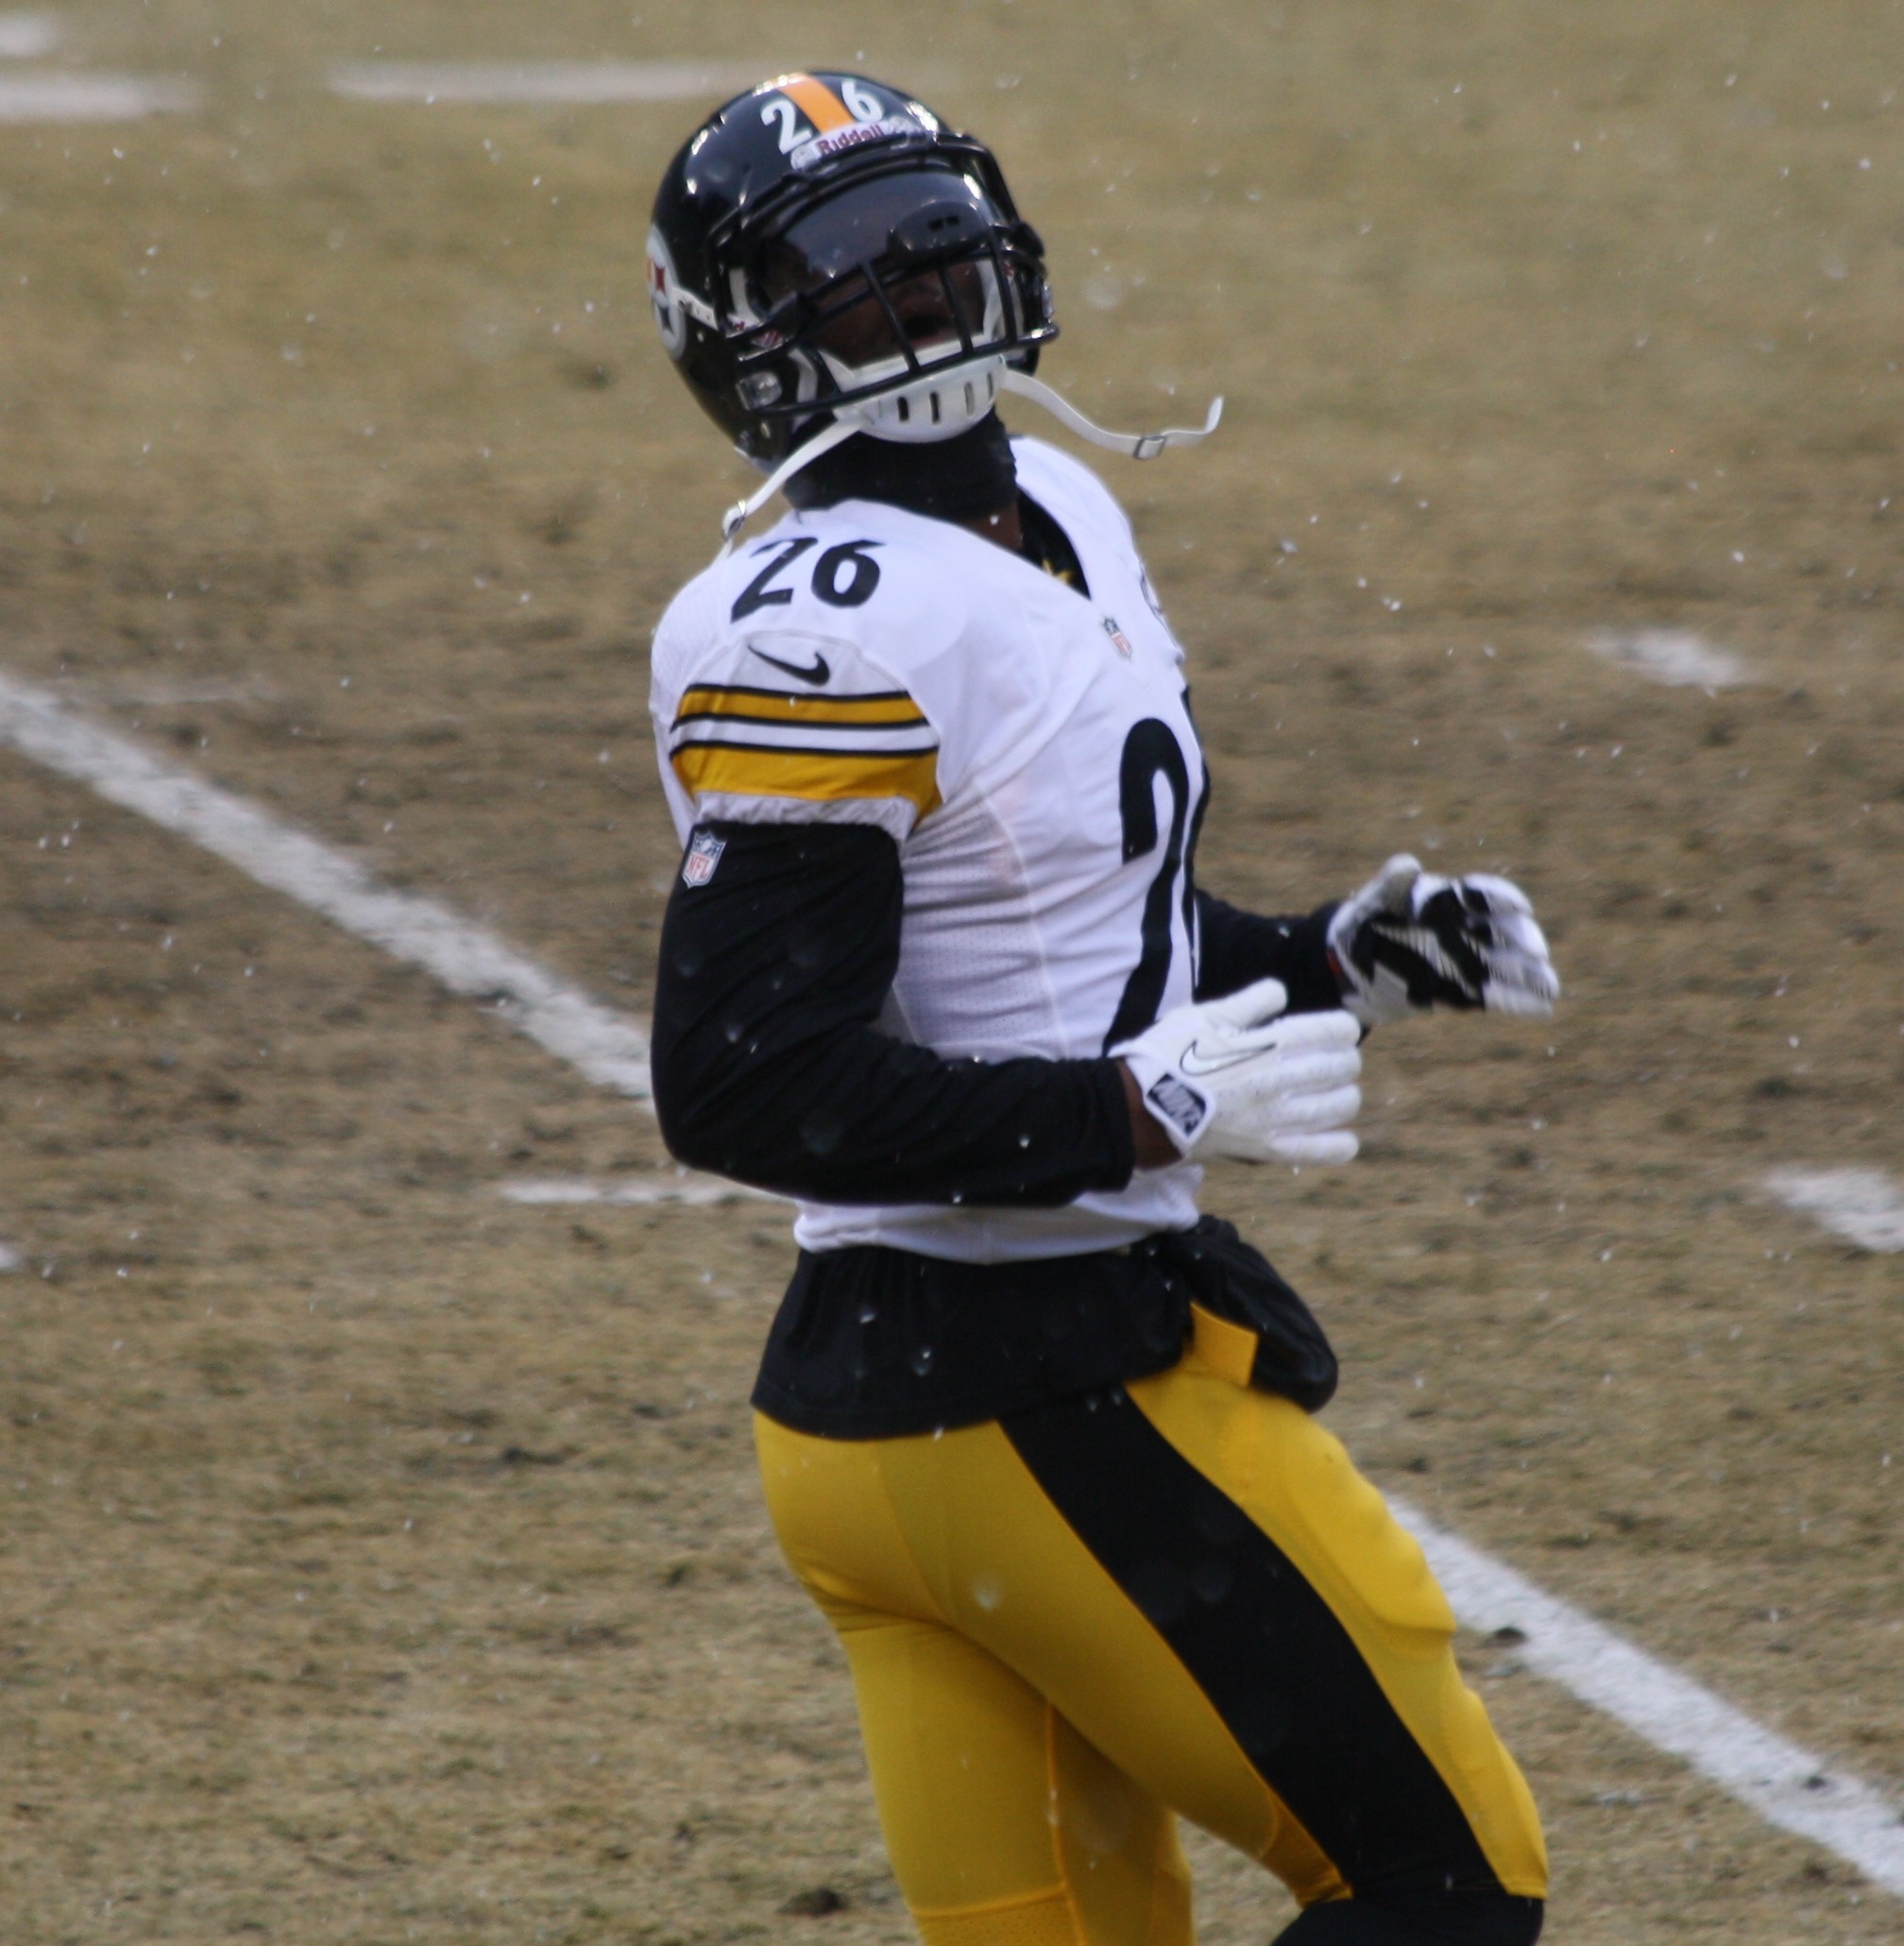 2016x2060 File:LeVeon Bell 26 practicing 2013.jpg